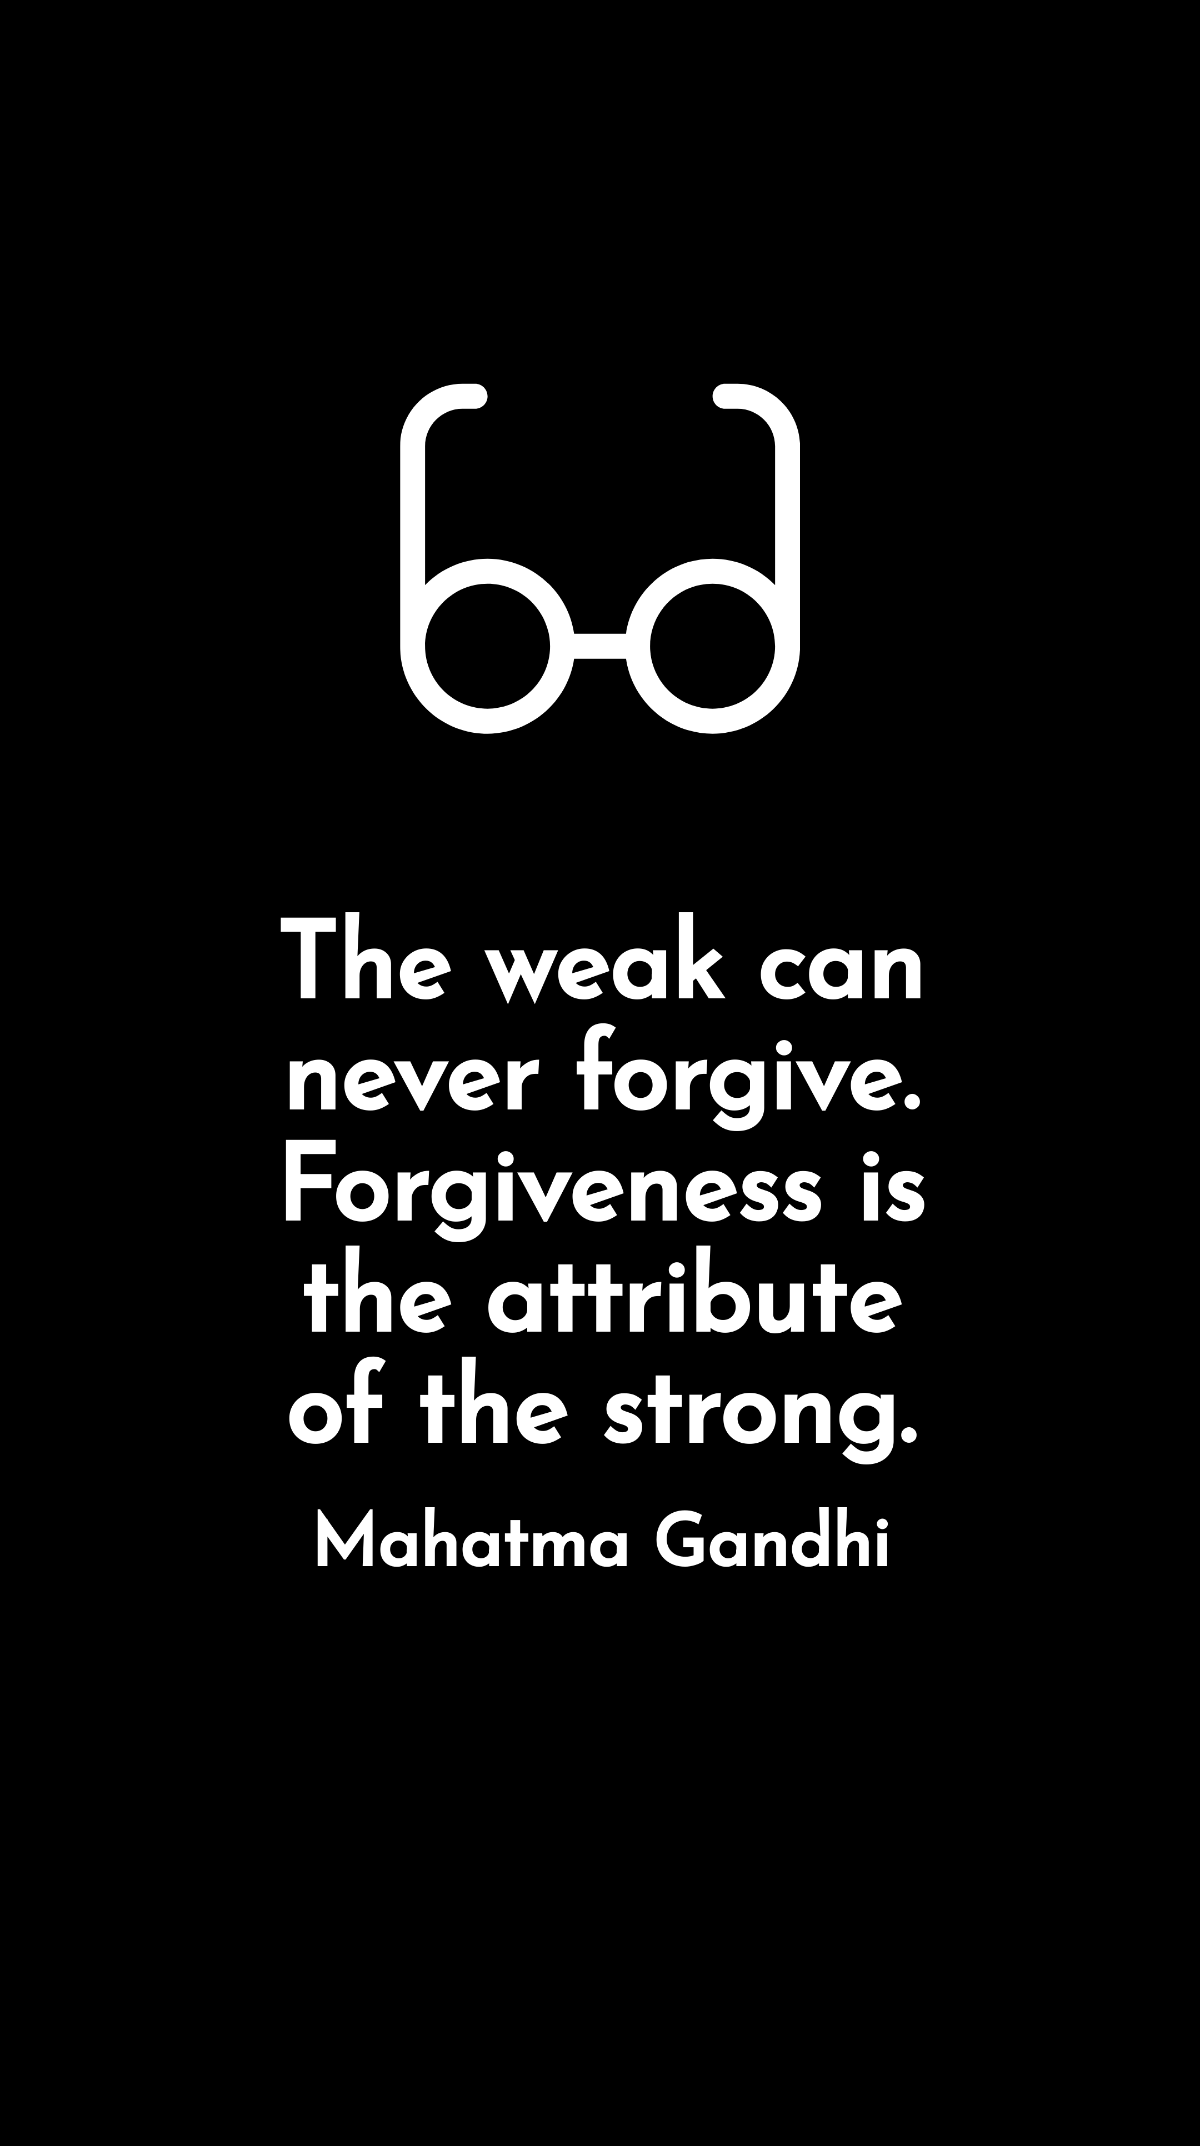 Mahatma Gandhi - The weak can never forgive. Forgiveness is the attribute of the strong.